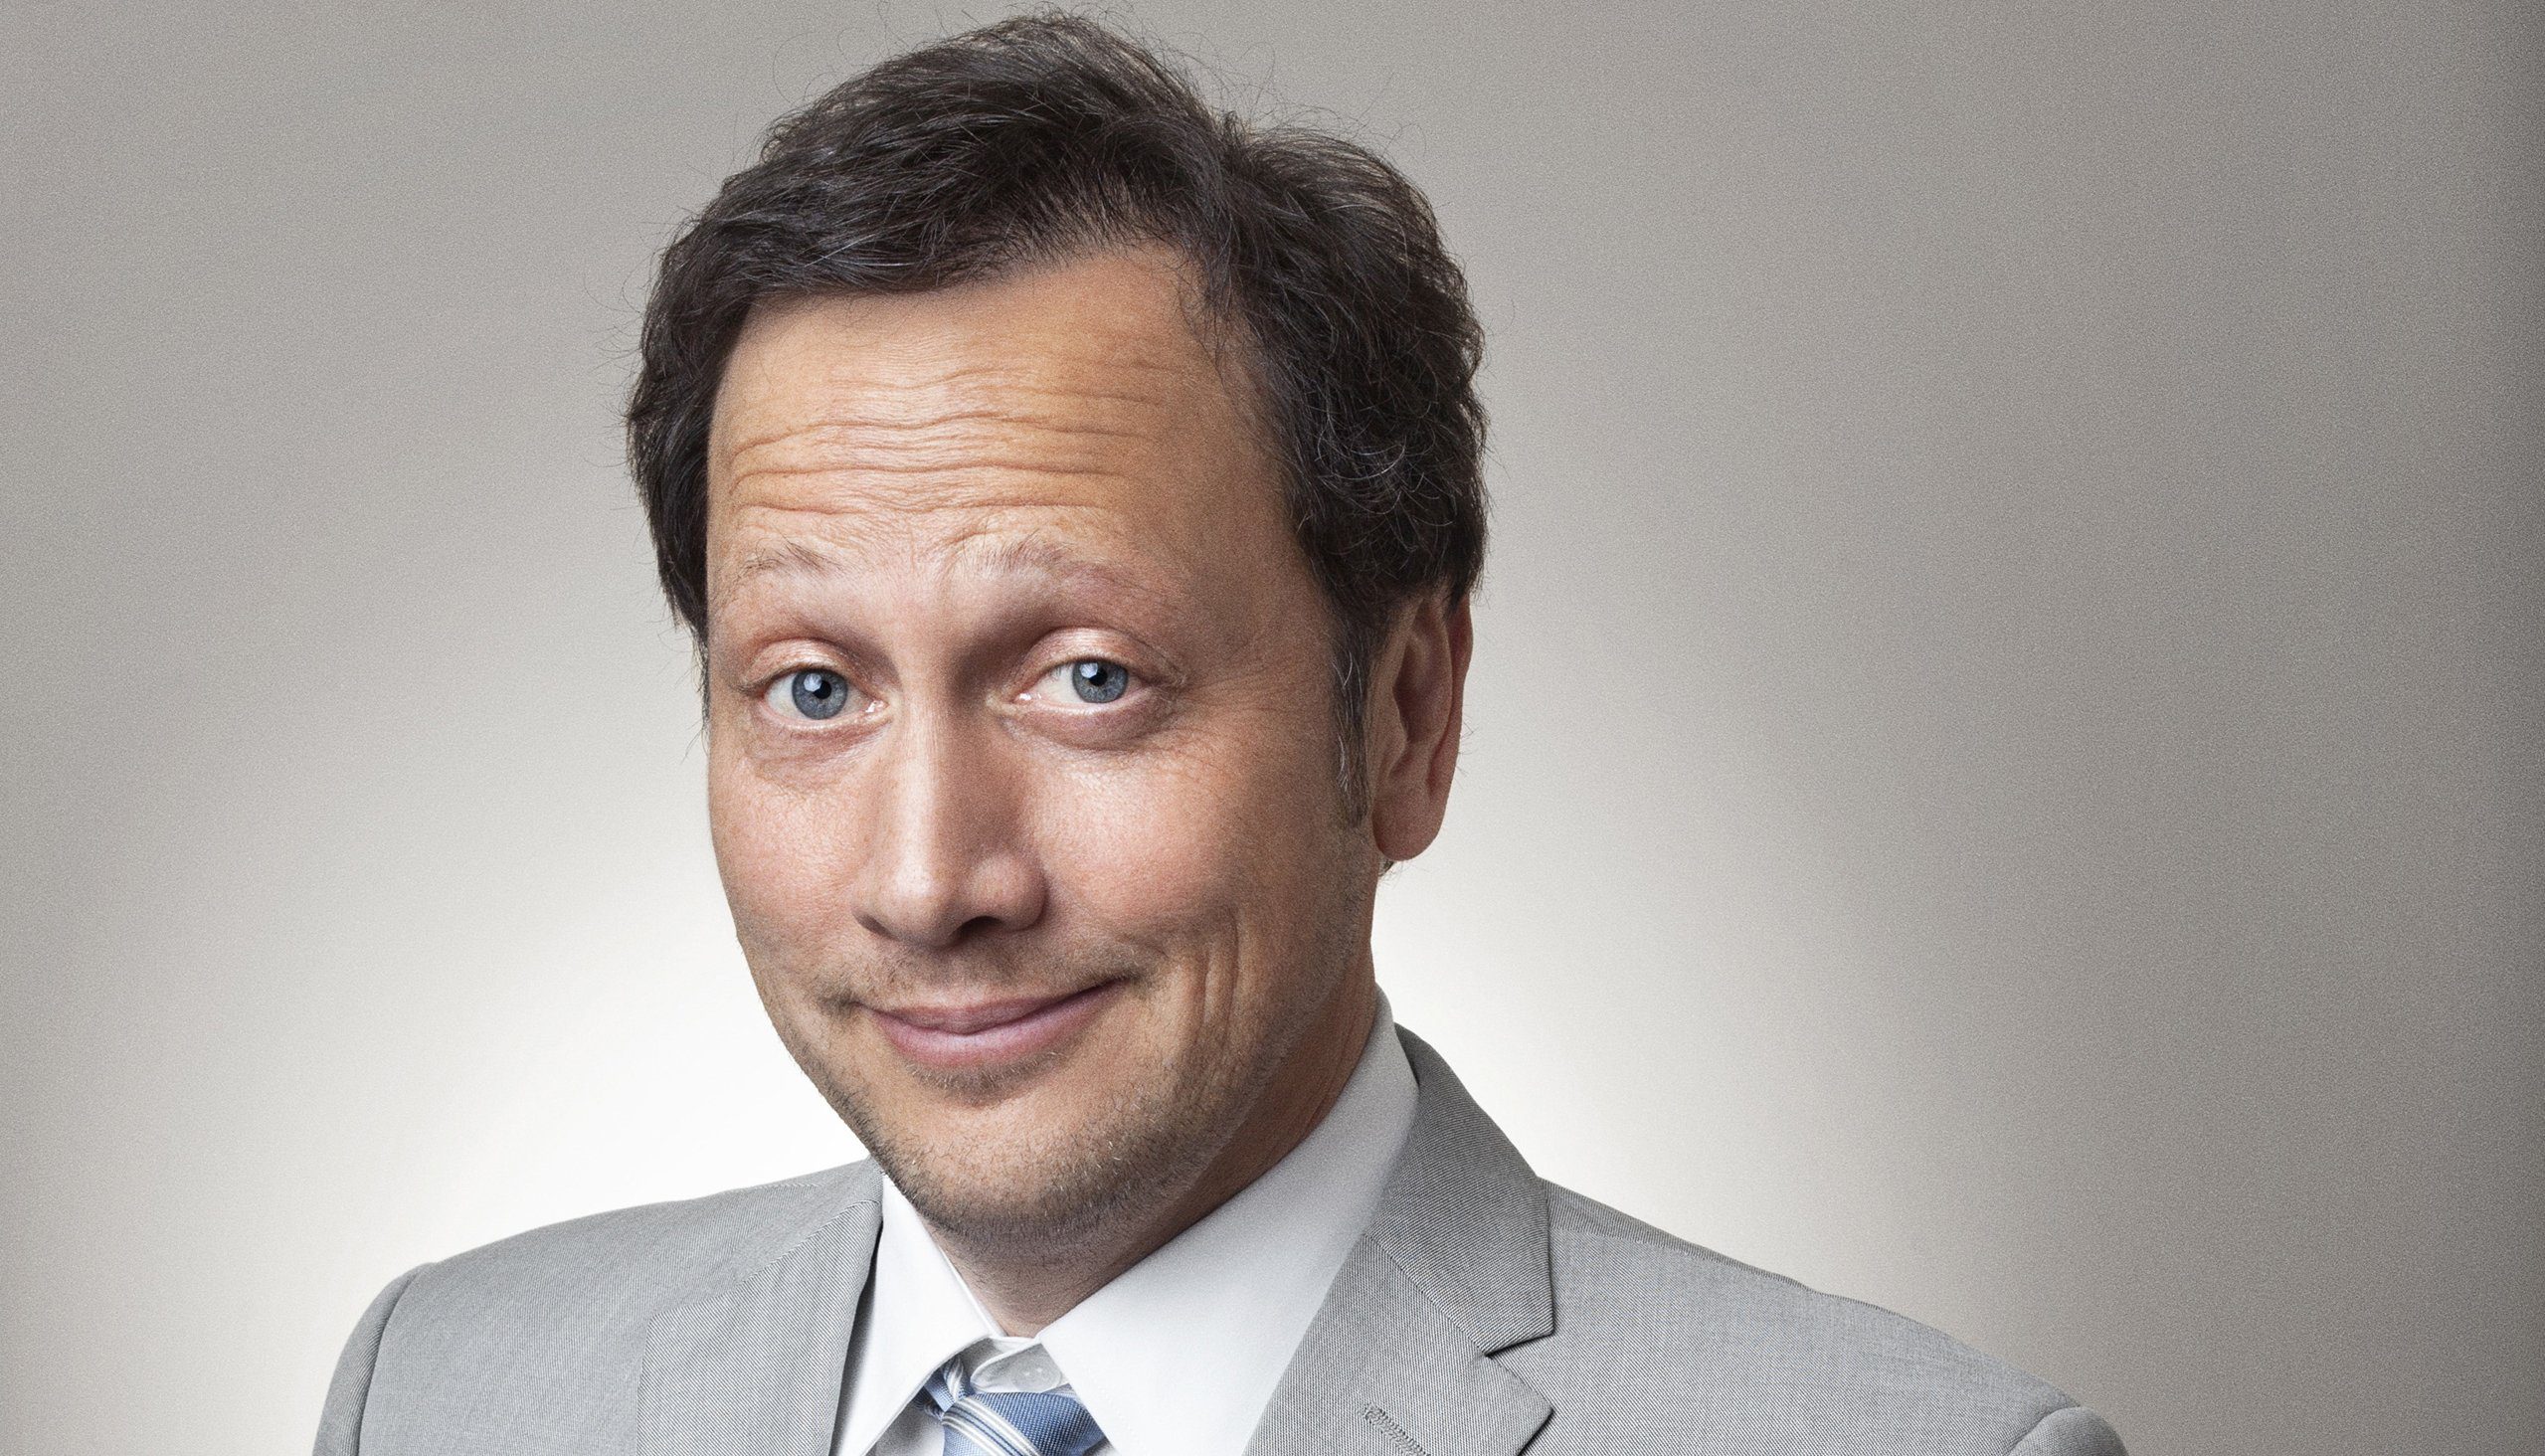 Why isn't Rob Schneider on Grown Ups 2? Reason for Rob